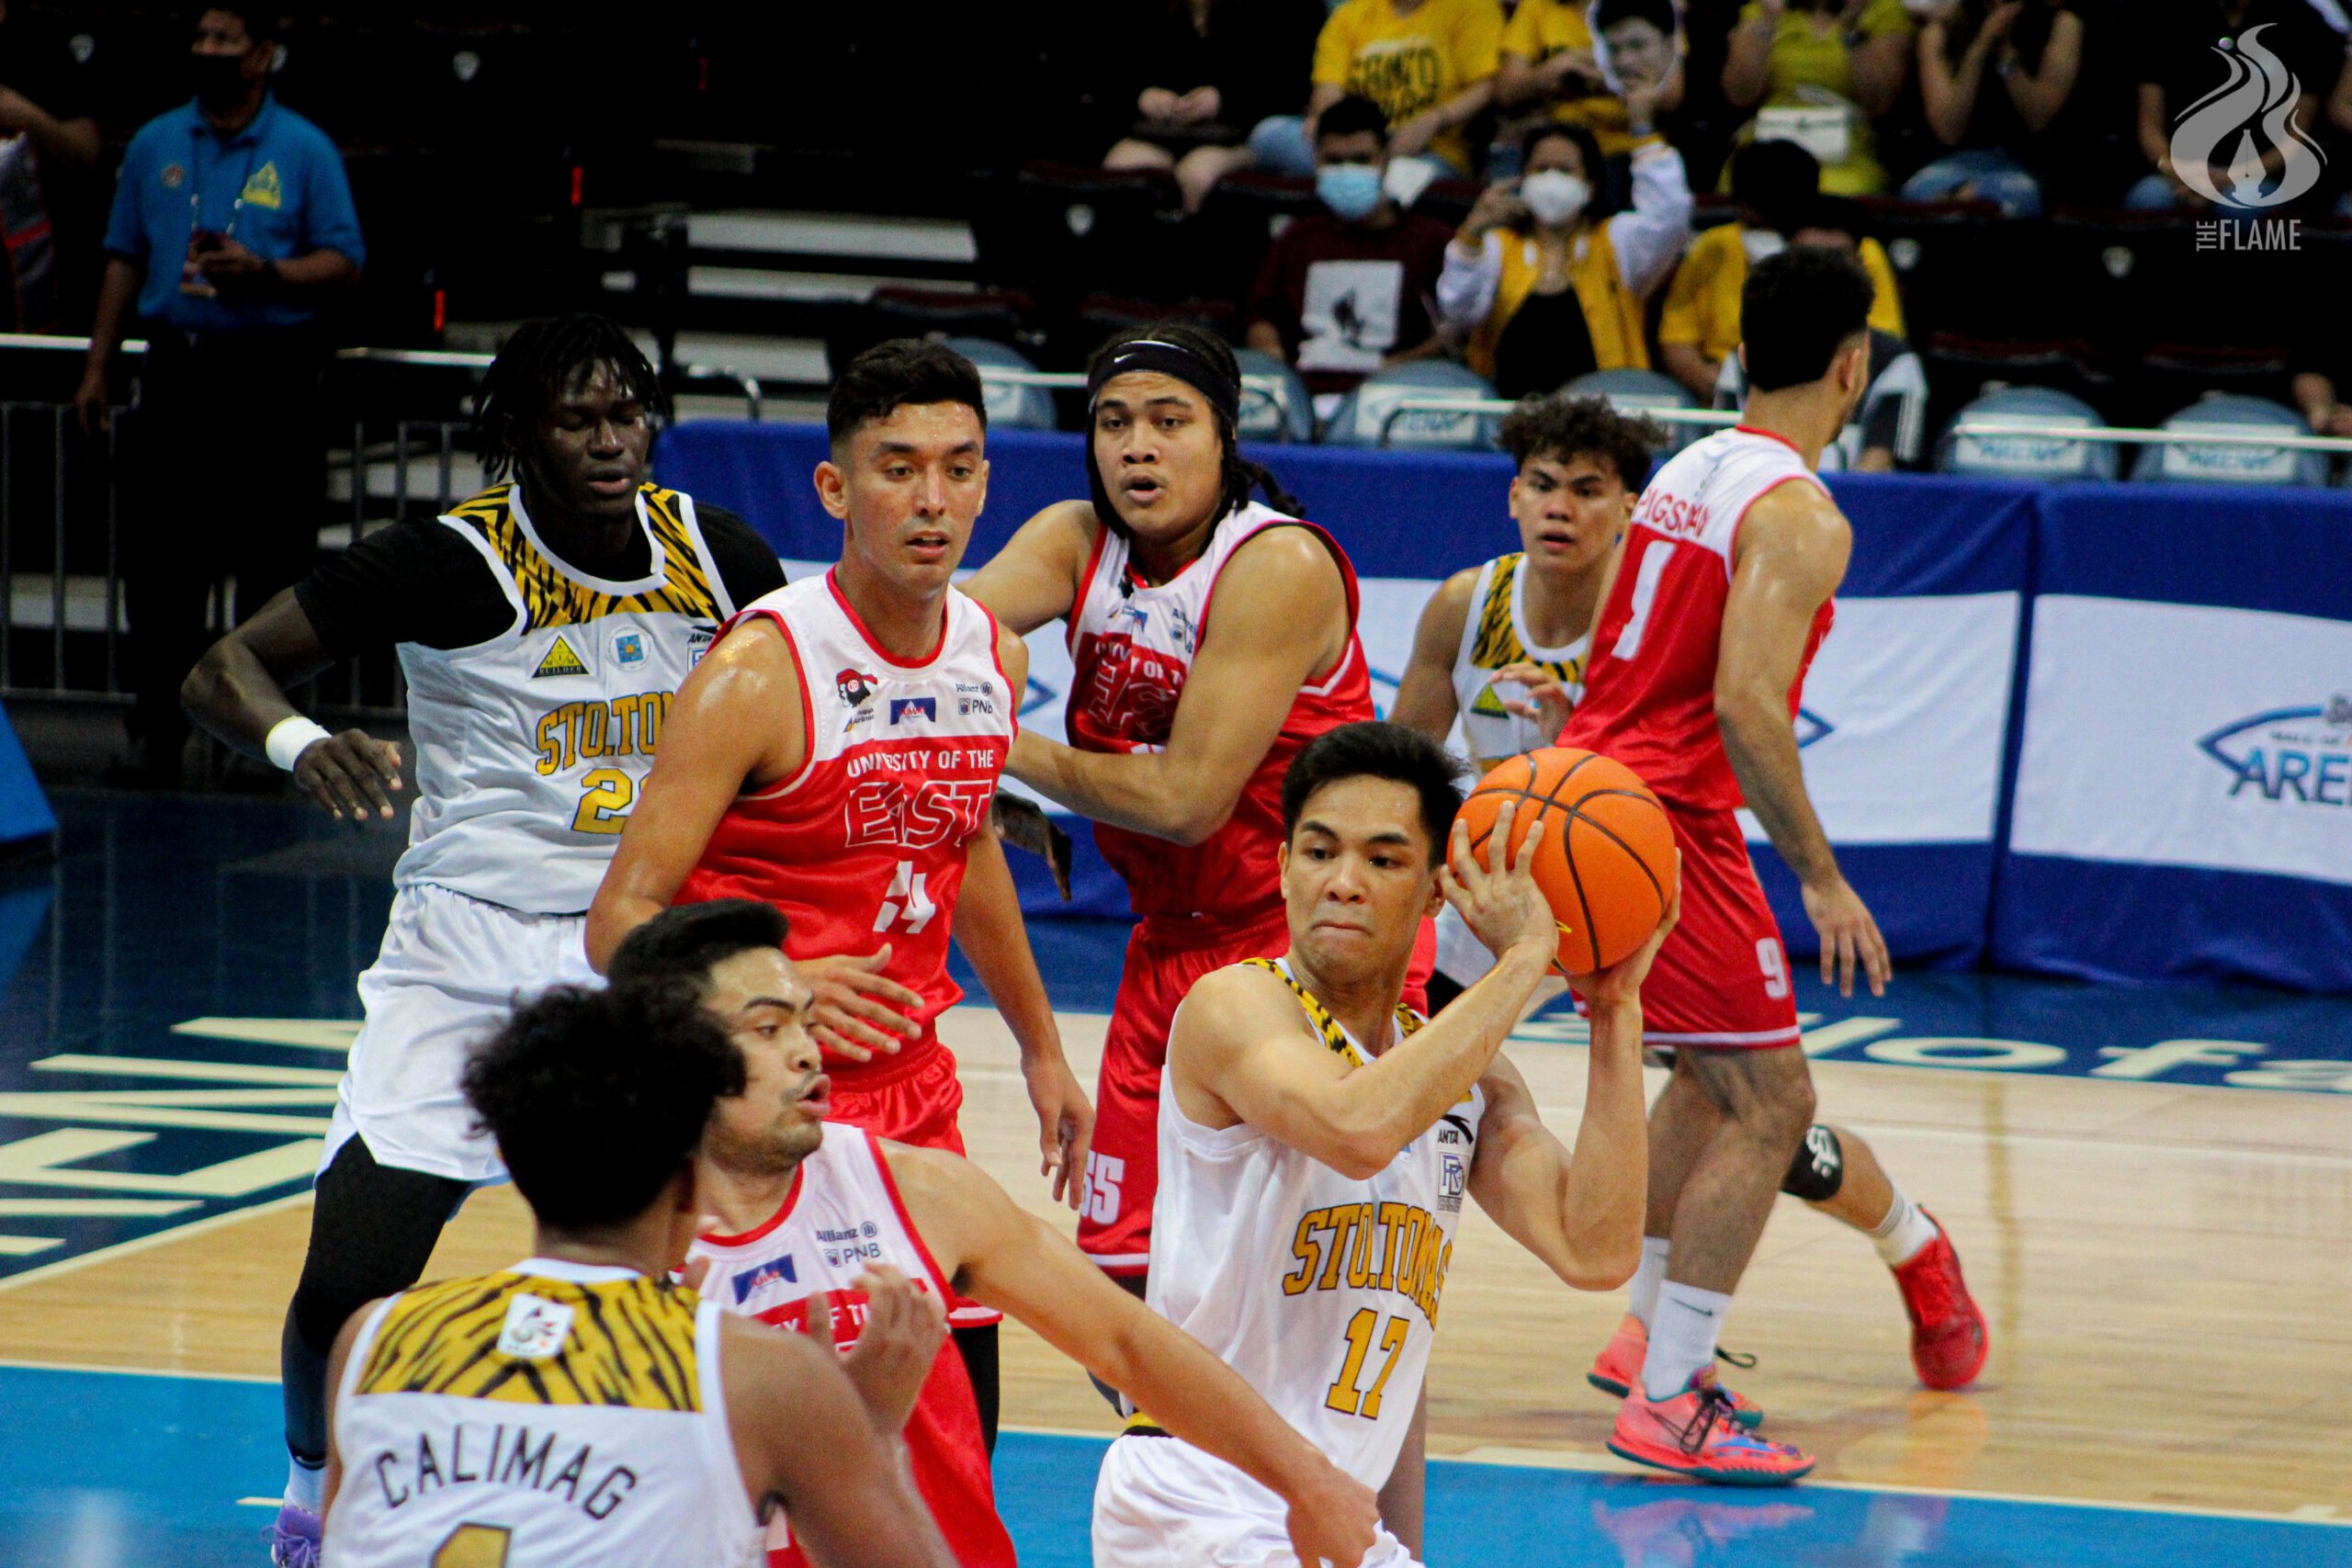 UST loses to UE for the first time in five years